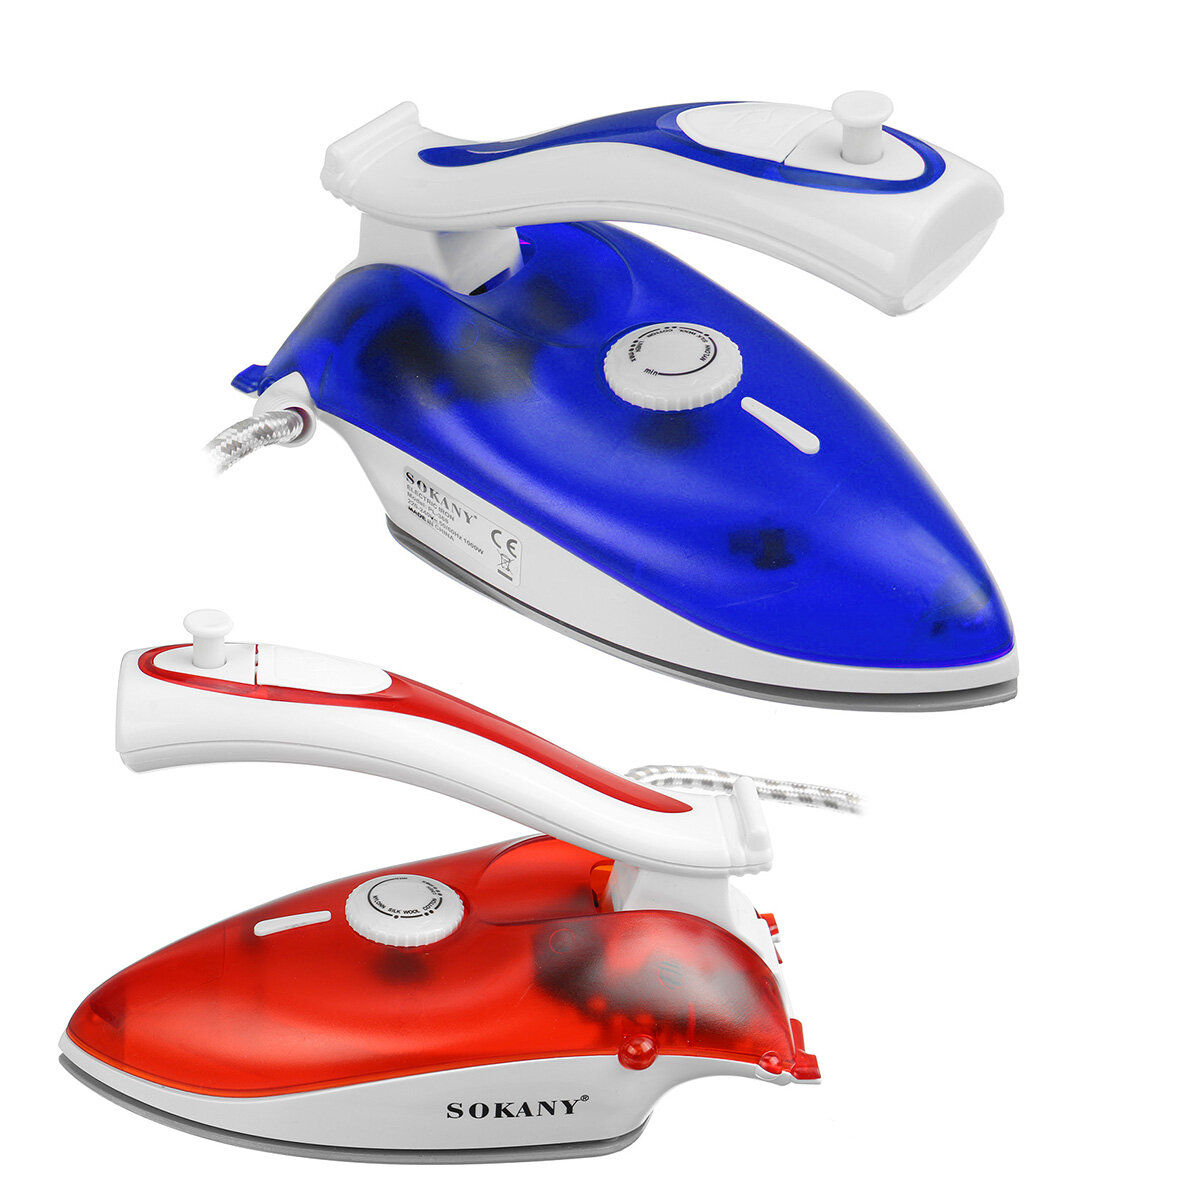 

SOKANY PL-368 1000W Handheld Portable Garment Steamer 5 Gear Ironing Machine Dry and Wet-ironing Wrinkle Remover Fast He